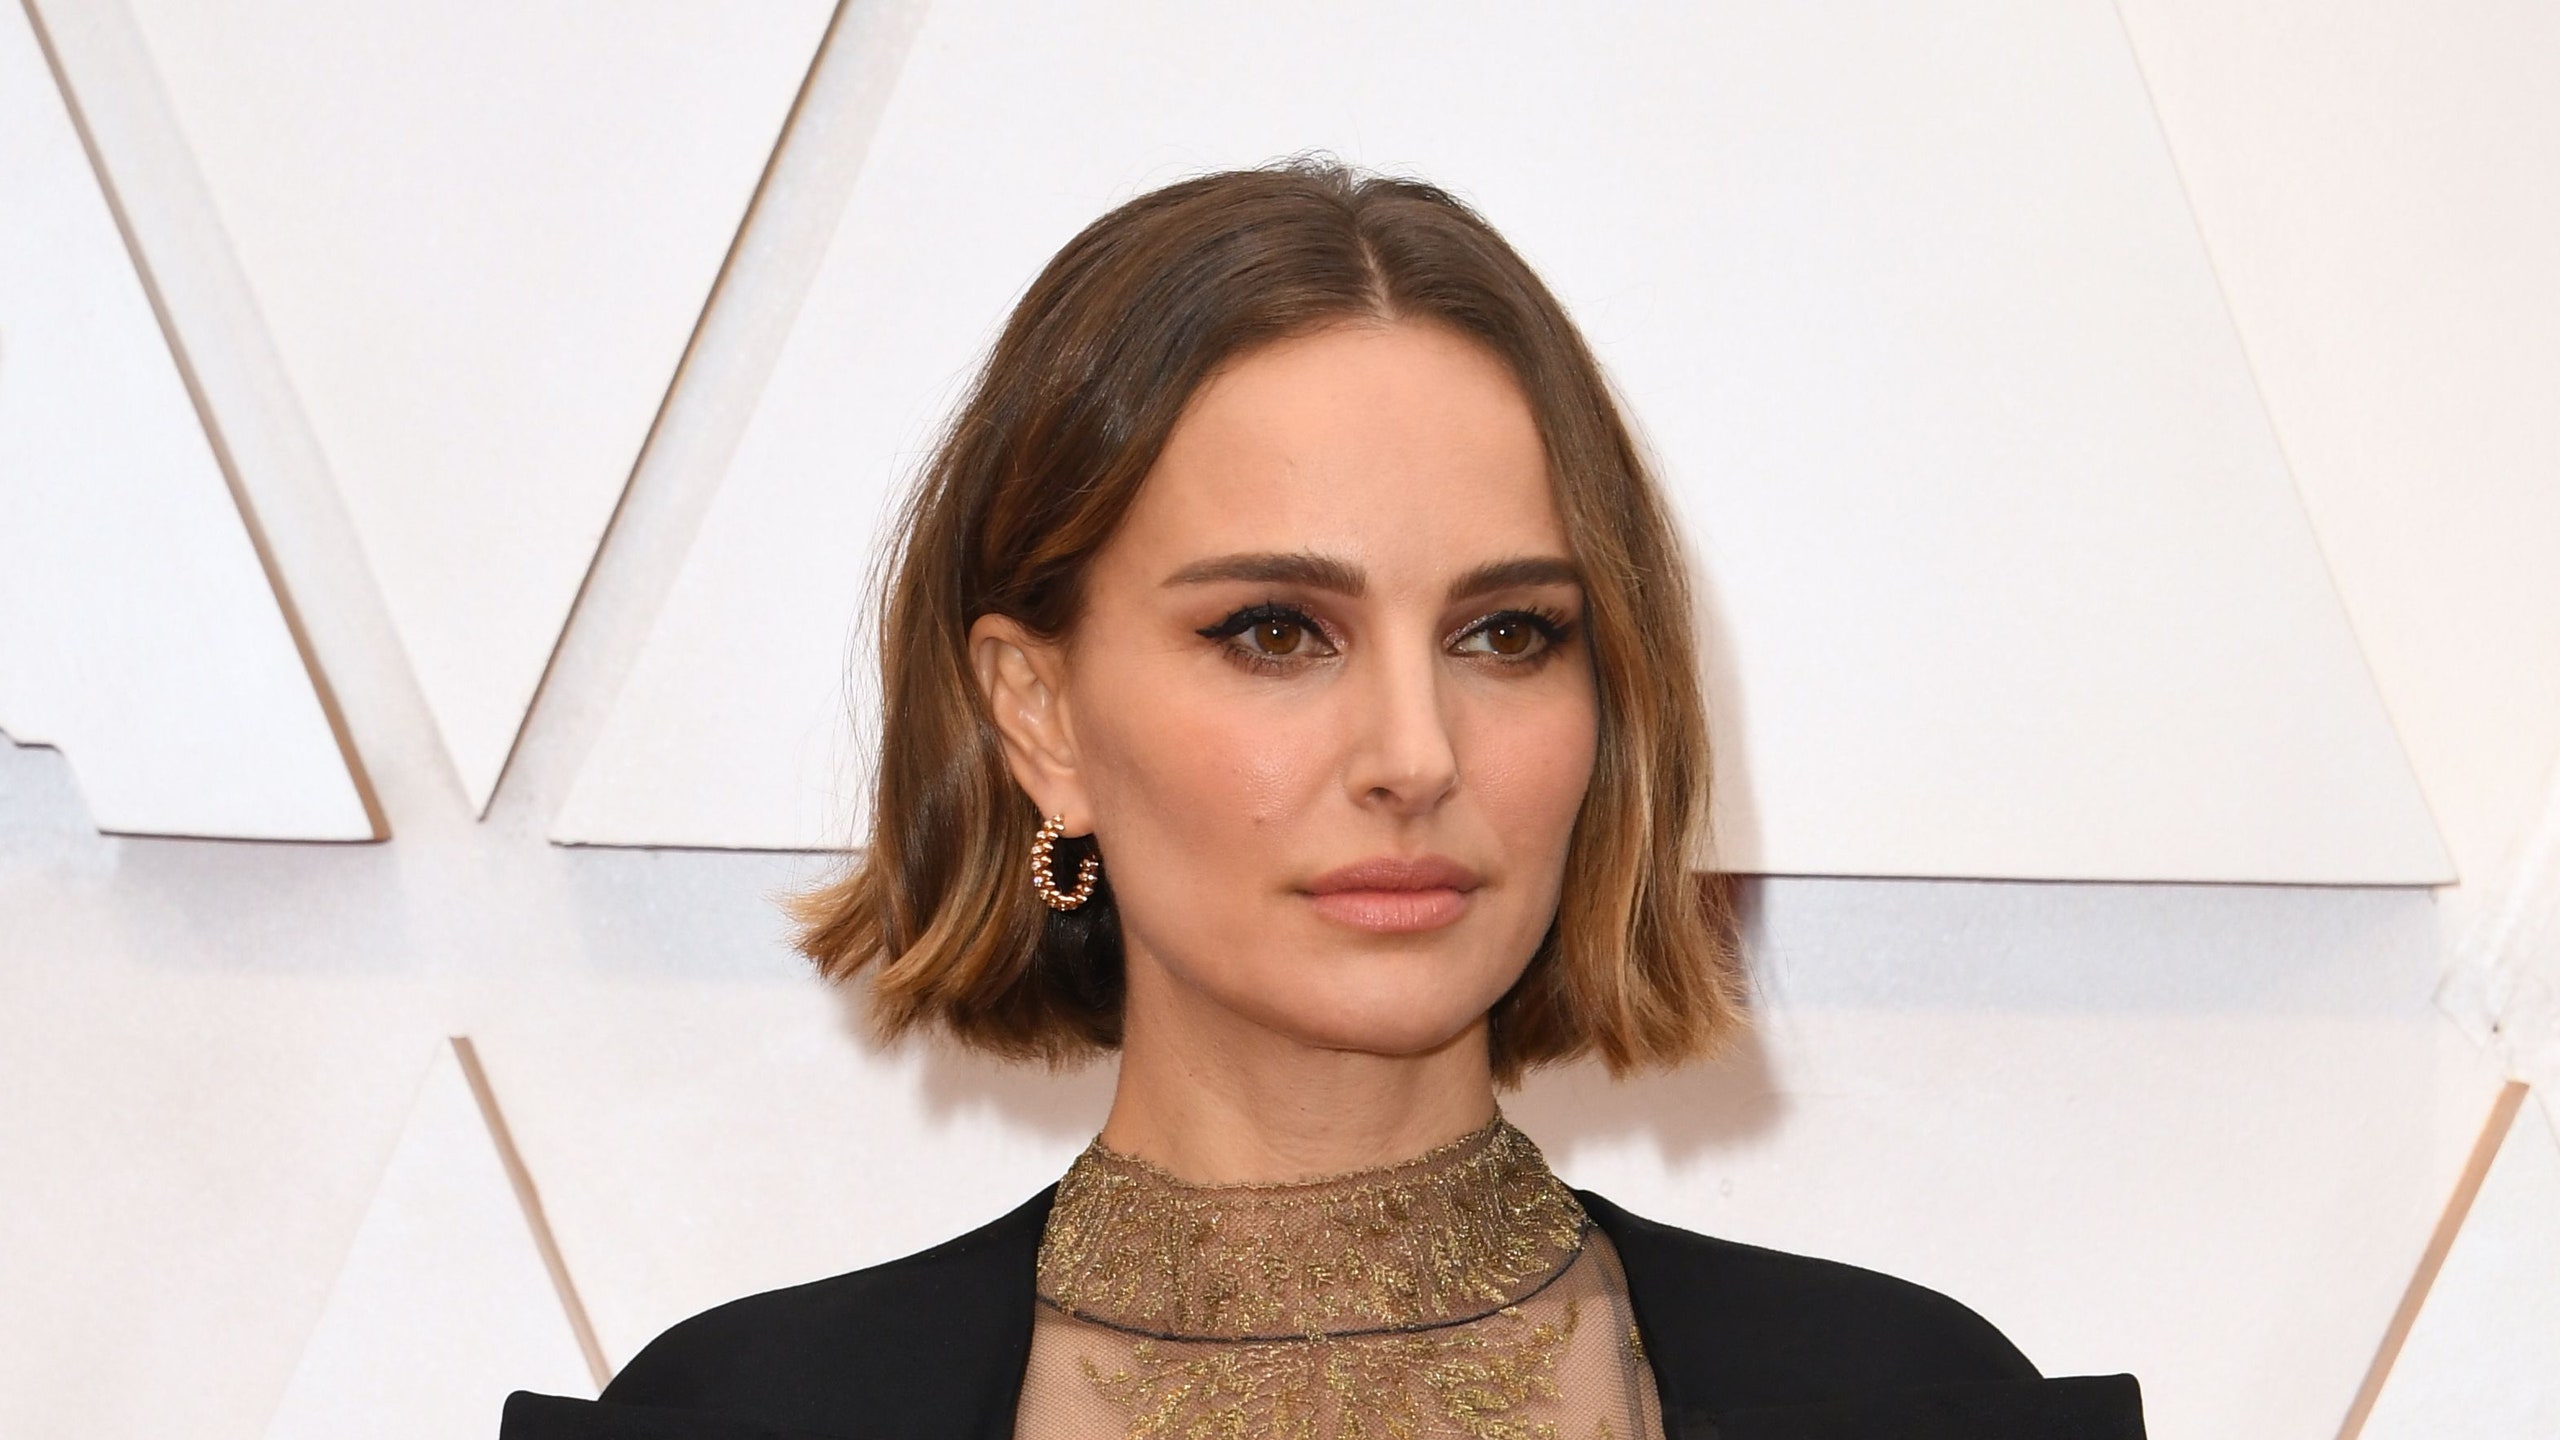 Natalie Portman among new owners of NWSL LA expansion team